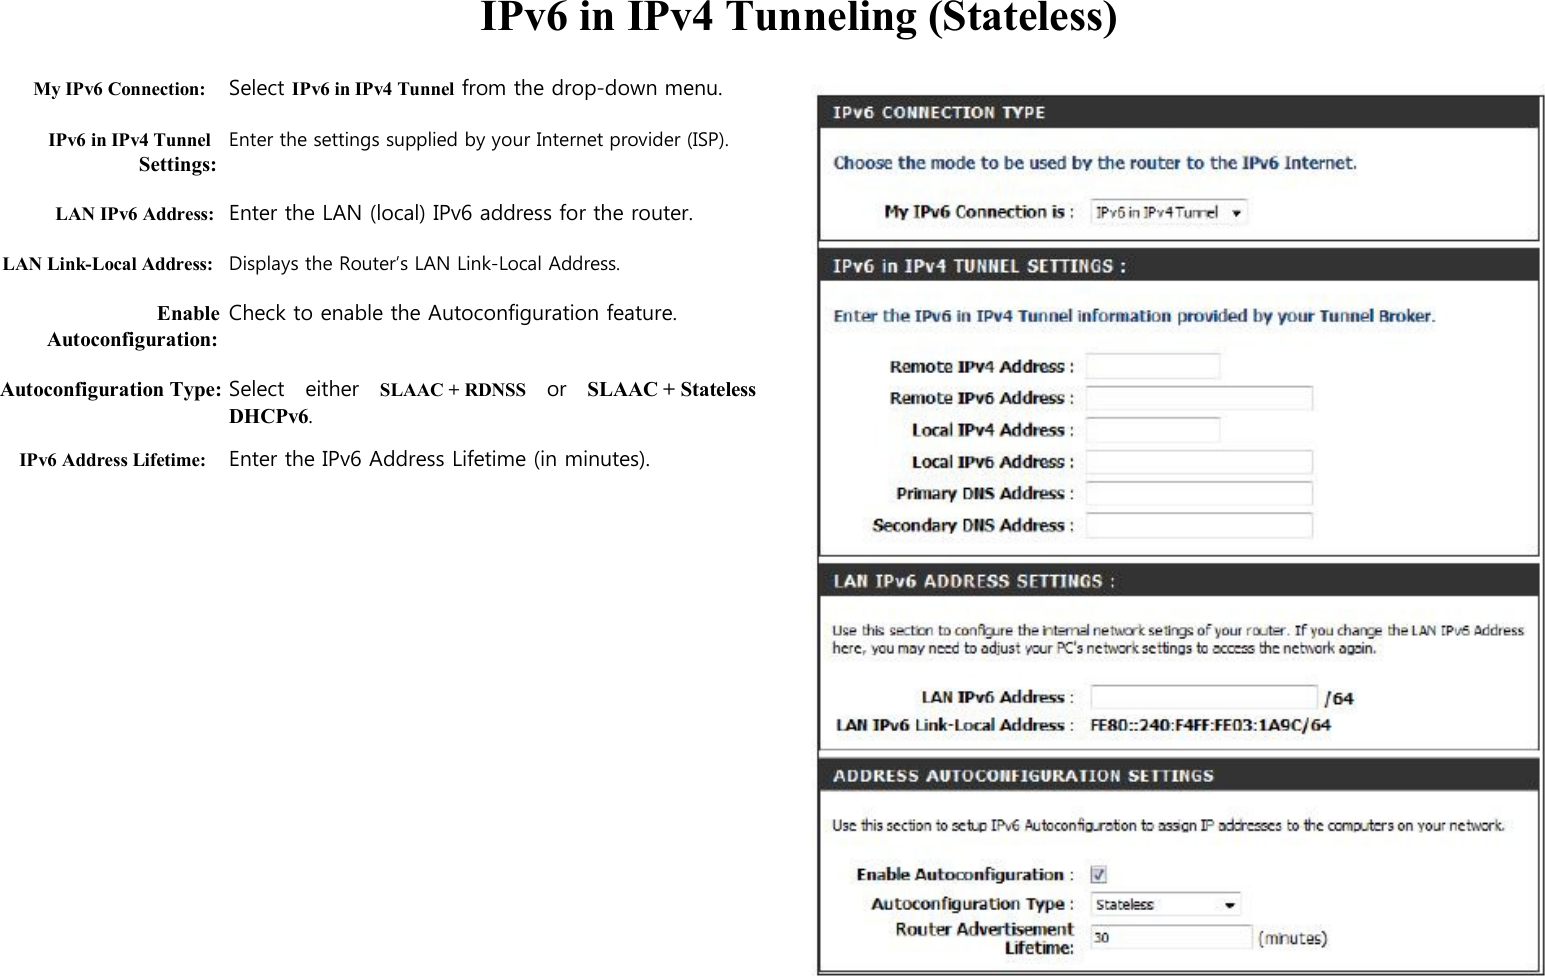  IPv6 in IPv4 Tunneling (Stateless)  My IPv6 Connection: Select IPv6 in IPv4 Tunnel from the drop-down menu.  IPv6 in IPv4 Tunnel Enter the settings supplied by your Internet provider (ISP). Settings:  LAN IPv6 Address: Enter the LAN (local) IPv6 address for the router.  LAN Link-Local Address: Displays the Router’s LAN Link-Local Address.  Enable Check to enable the Autoconfiguration feature. Autoconfiguration:  Autoconfiguration Type: Select    either    SLAAC + RDNSS    or    SLAAC + Stateless   DHCPv6. IPv6 Address Lifetime: Enter the IPv6 Address Lifetime (in minutes).                                     